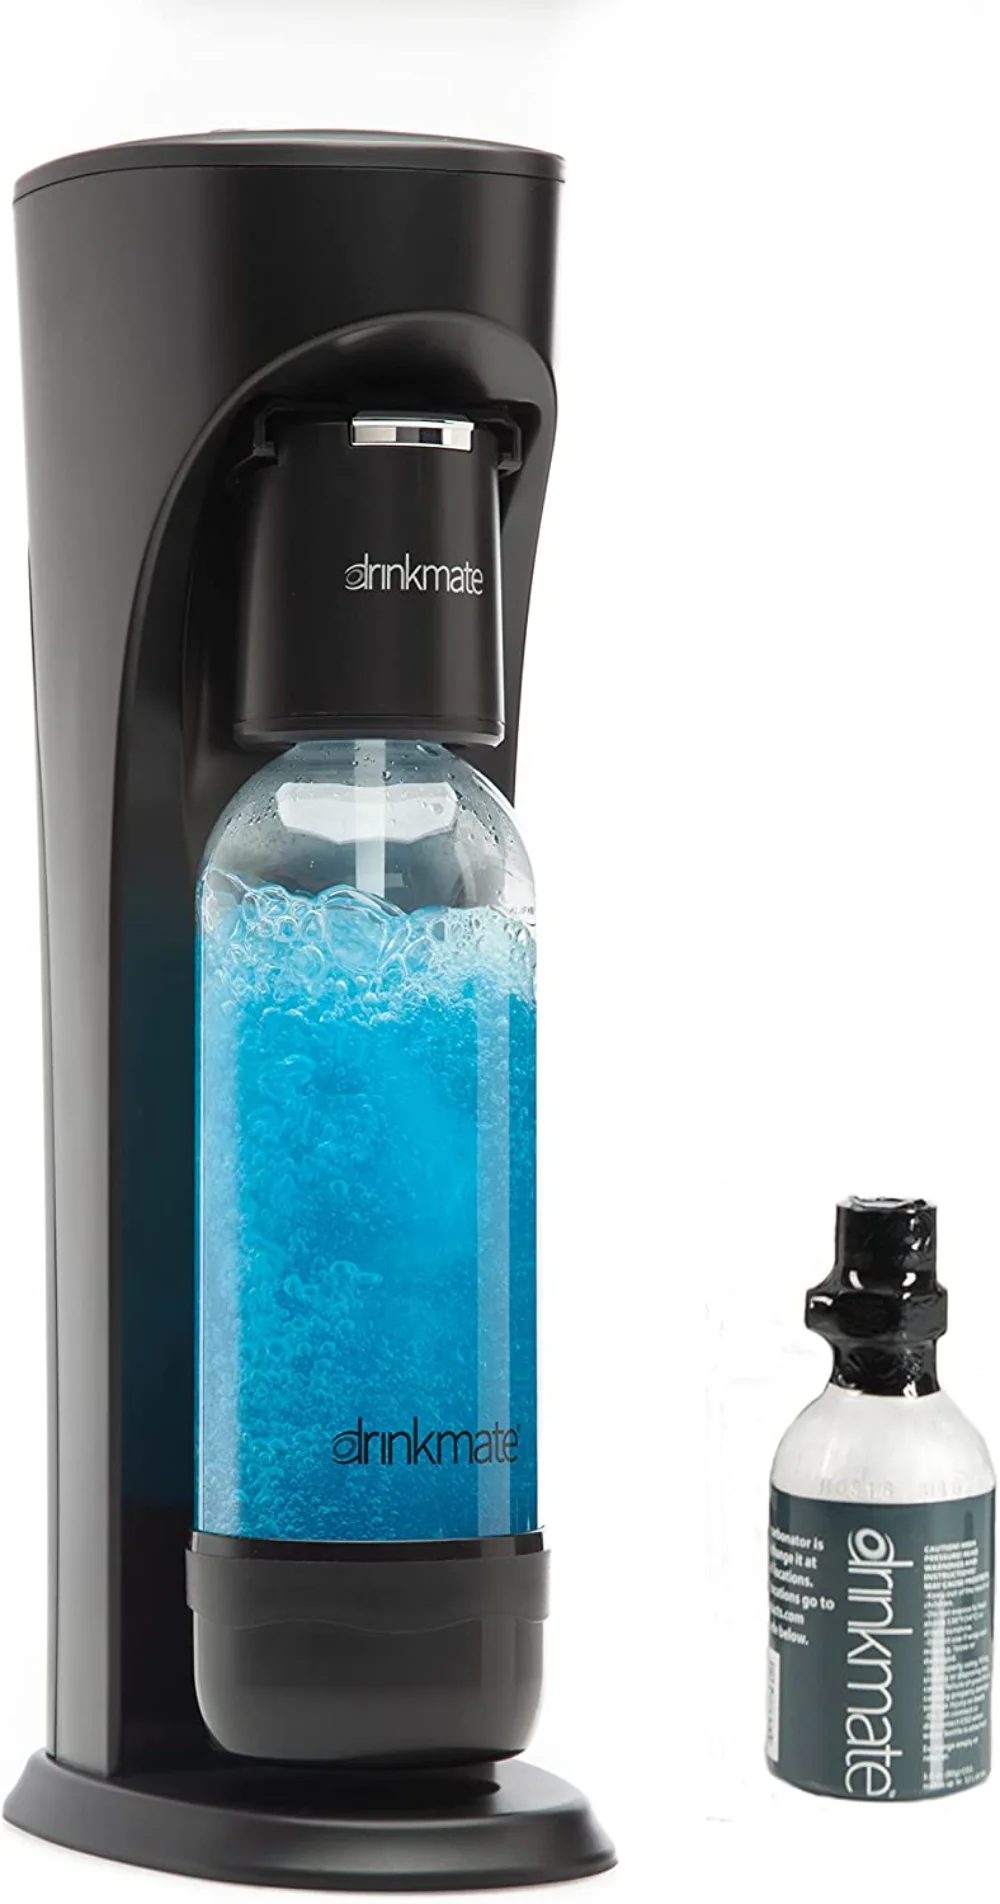 DrinkMate OmniFizz Sparkling Water and Soda Maker, Carbonates Any Drink, with 3 oz CO2 Test Cylinder (Matte Black) tankinis it s a good day to drink on a boat halter tankini set in black size l m xl